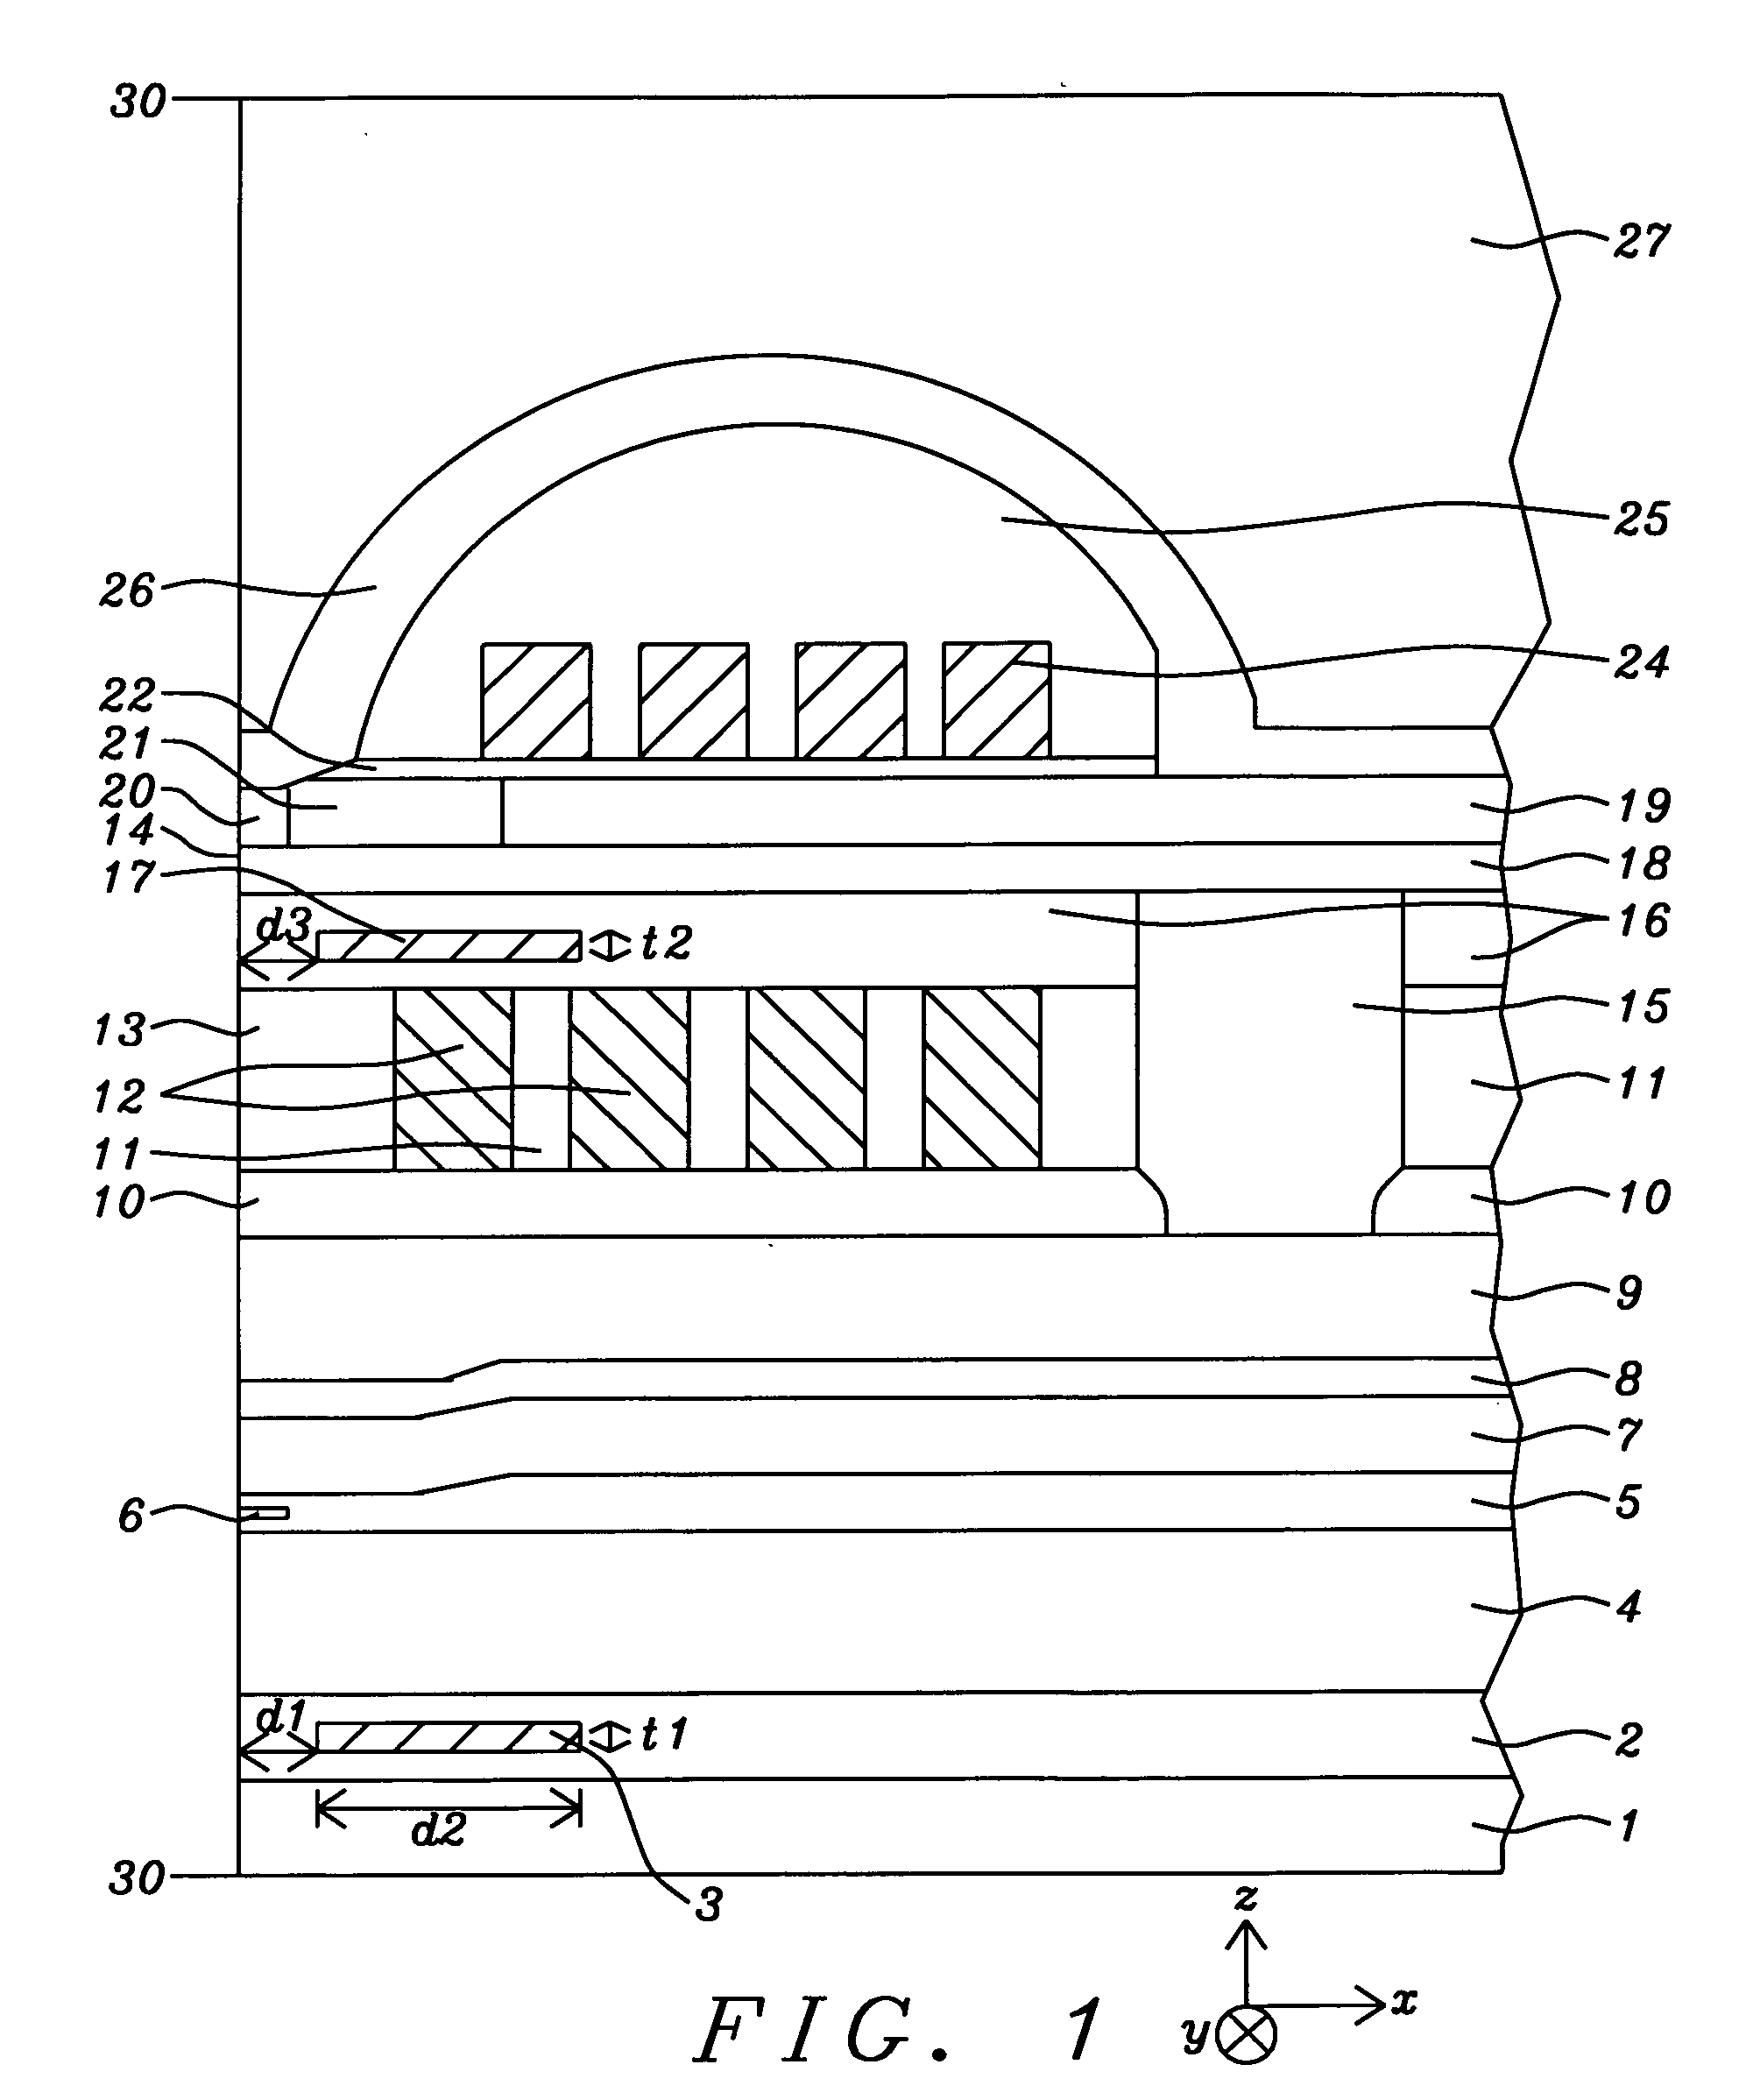 Vertically stacked DFH heater design for protrusion shape control